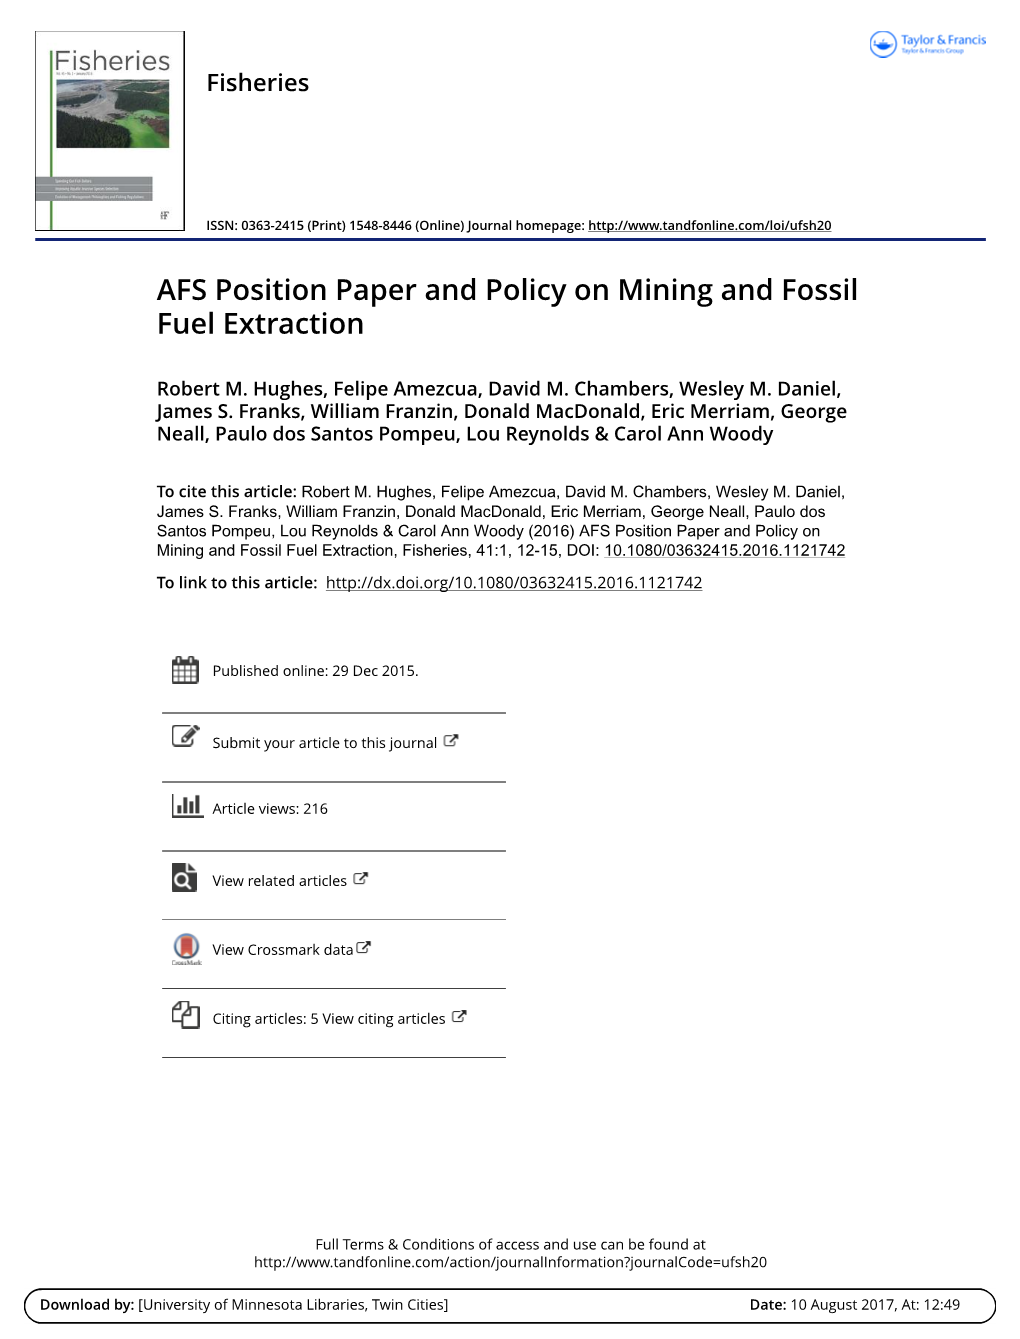 AFS Position Paper and Policy on Mining and Fossil Fuel Extraction